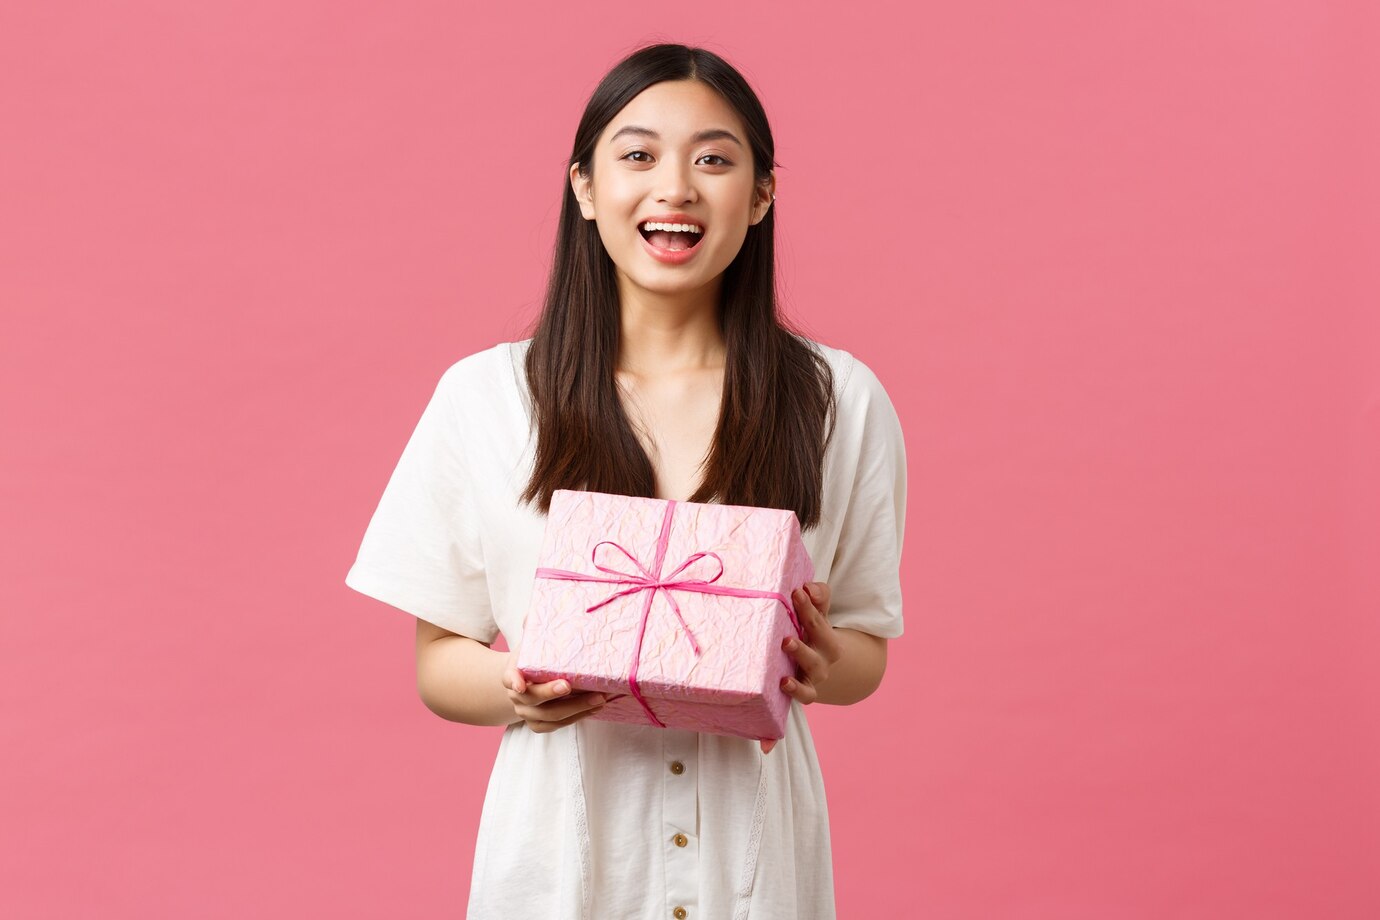 Tips To Make Your Gifts For Her For $75 Stand Out